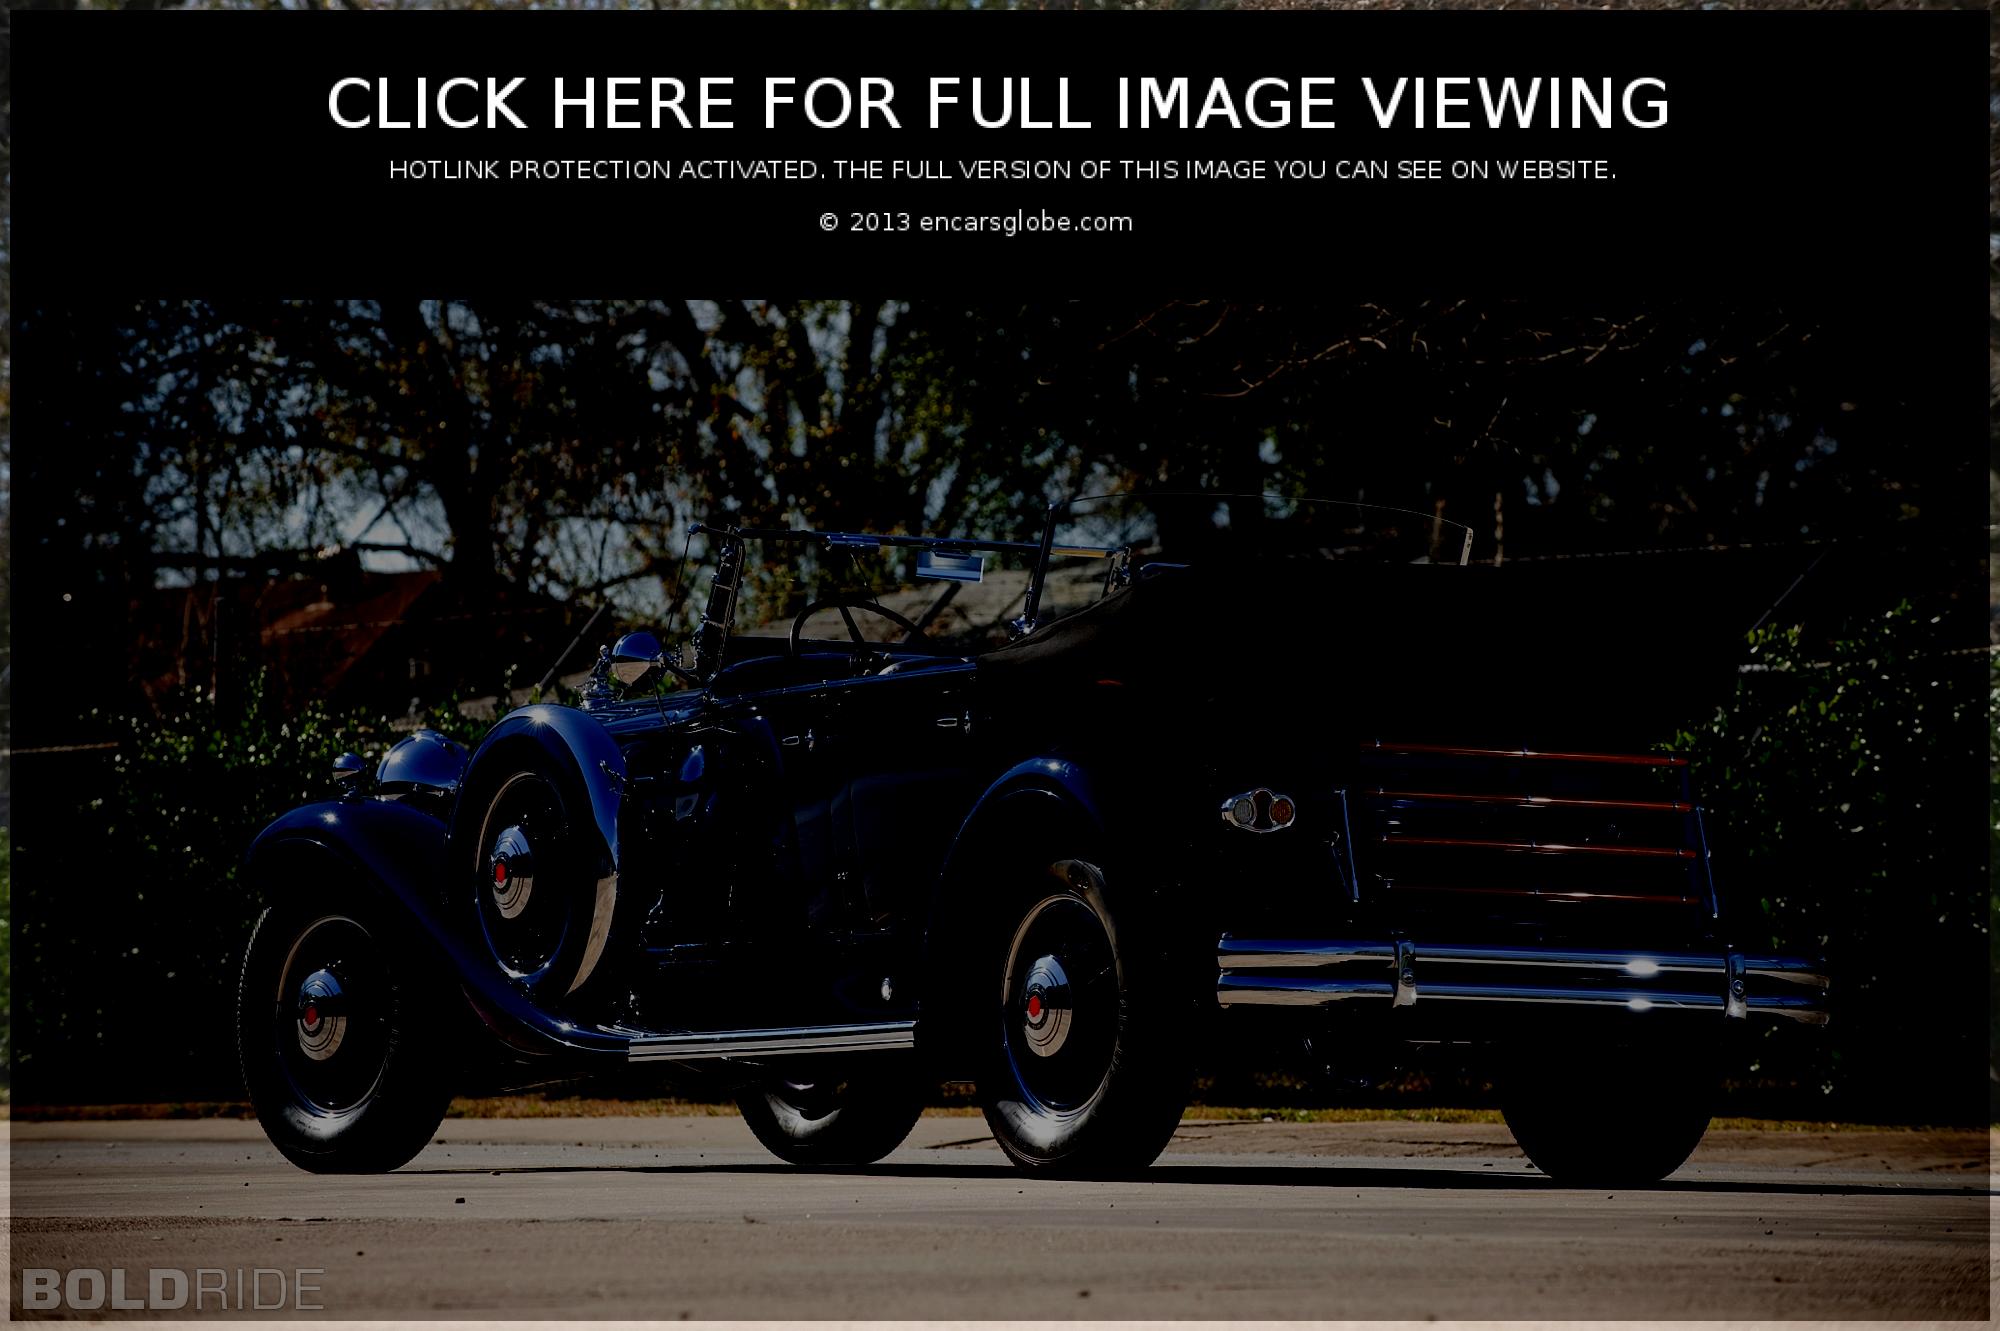 Gallery of all models of Packard: Packard Super Eight One-Eighty ...